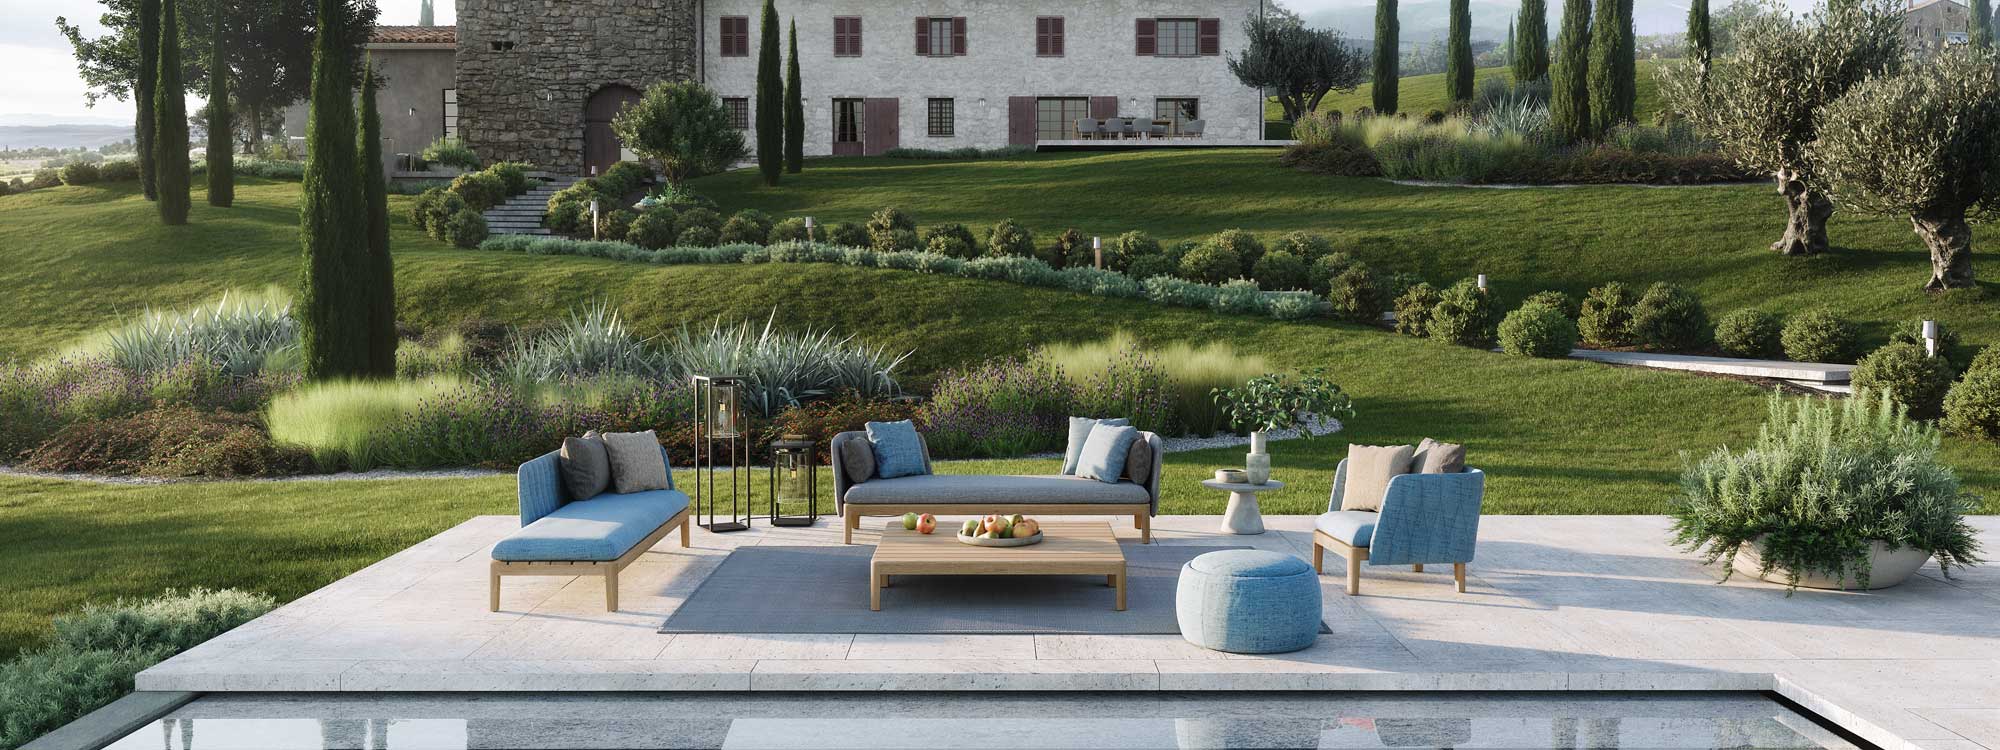 Image of Royal Botania Calypso garden furniture on poolside terrace in front of Italian villa surrounded by rolling countryside punctuated by Cypress trees